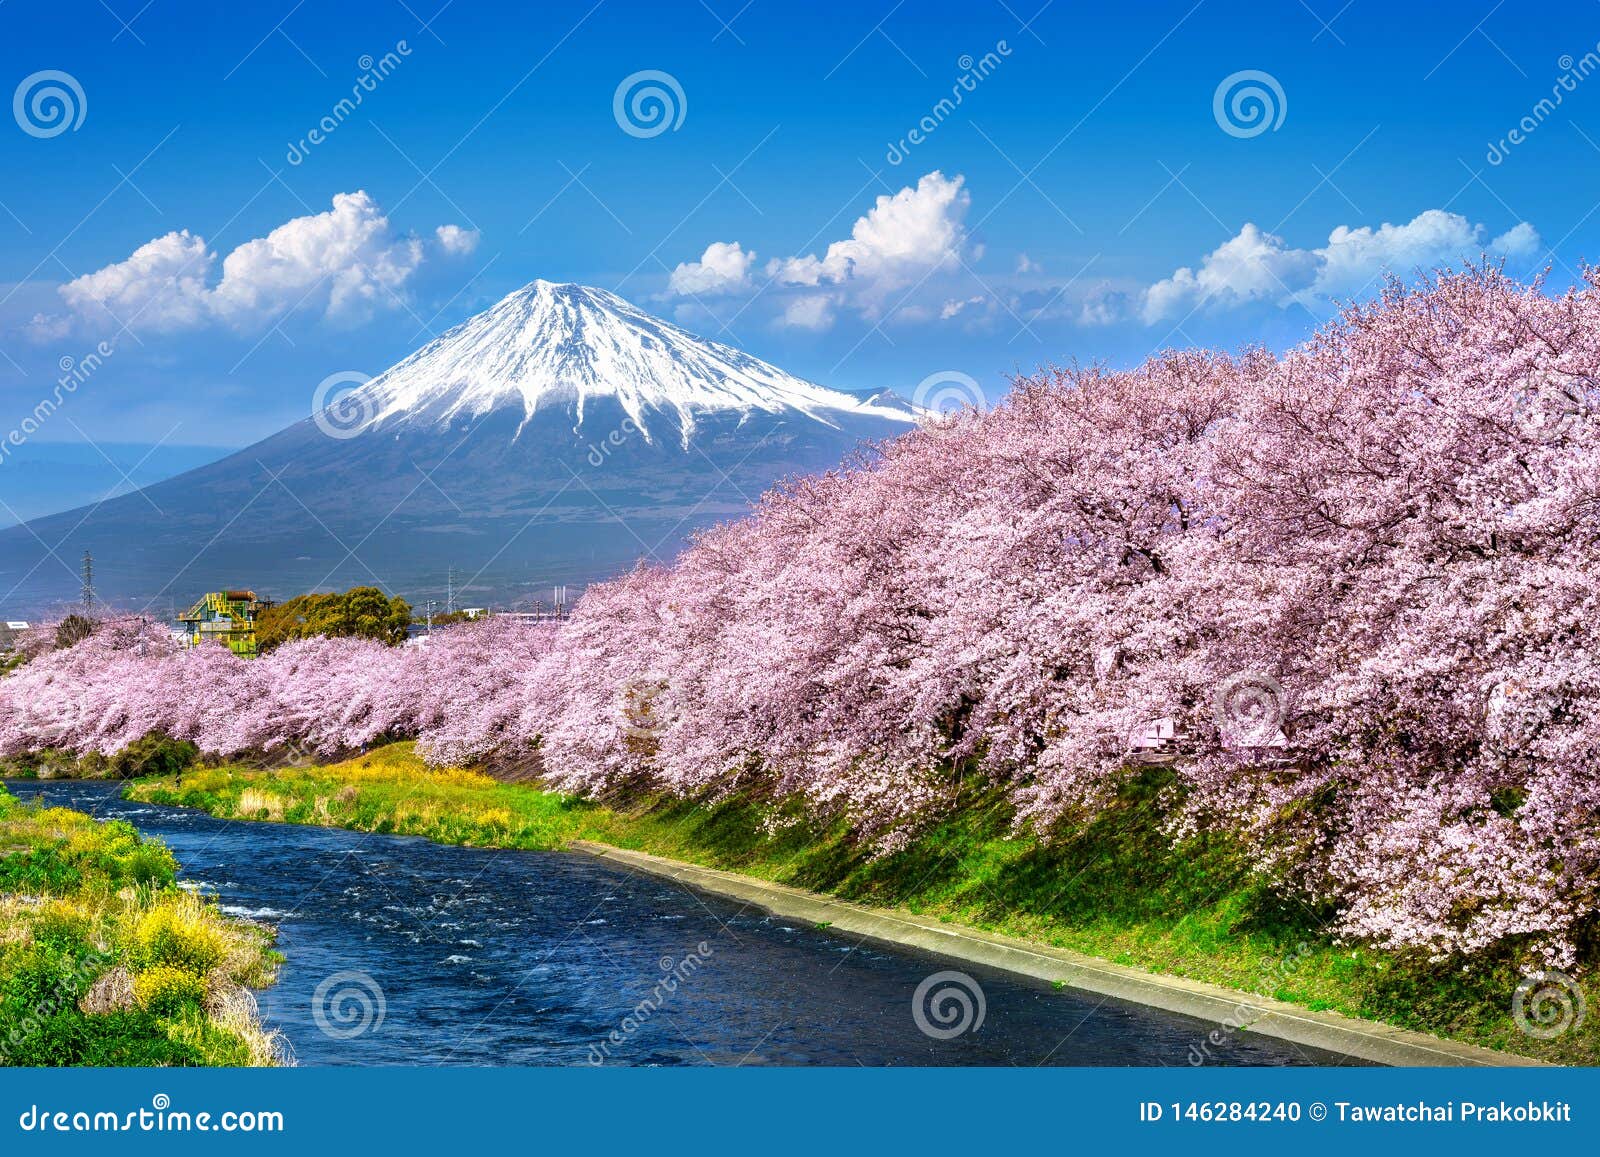 fuji mountains and  cherry blossoms in spring, japan